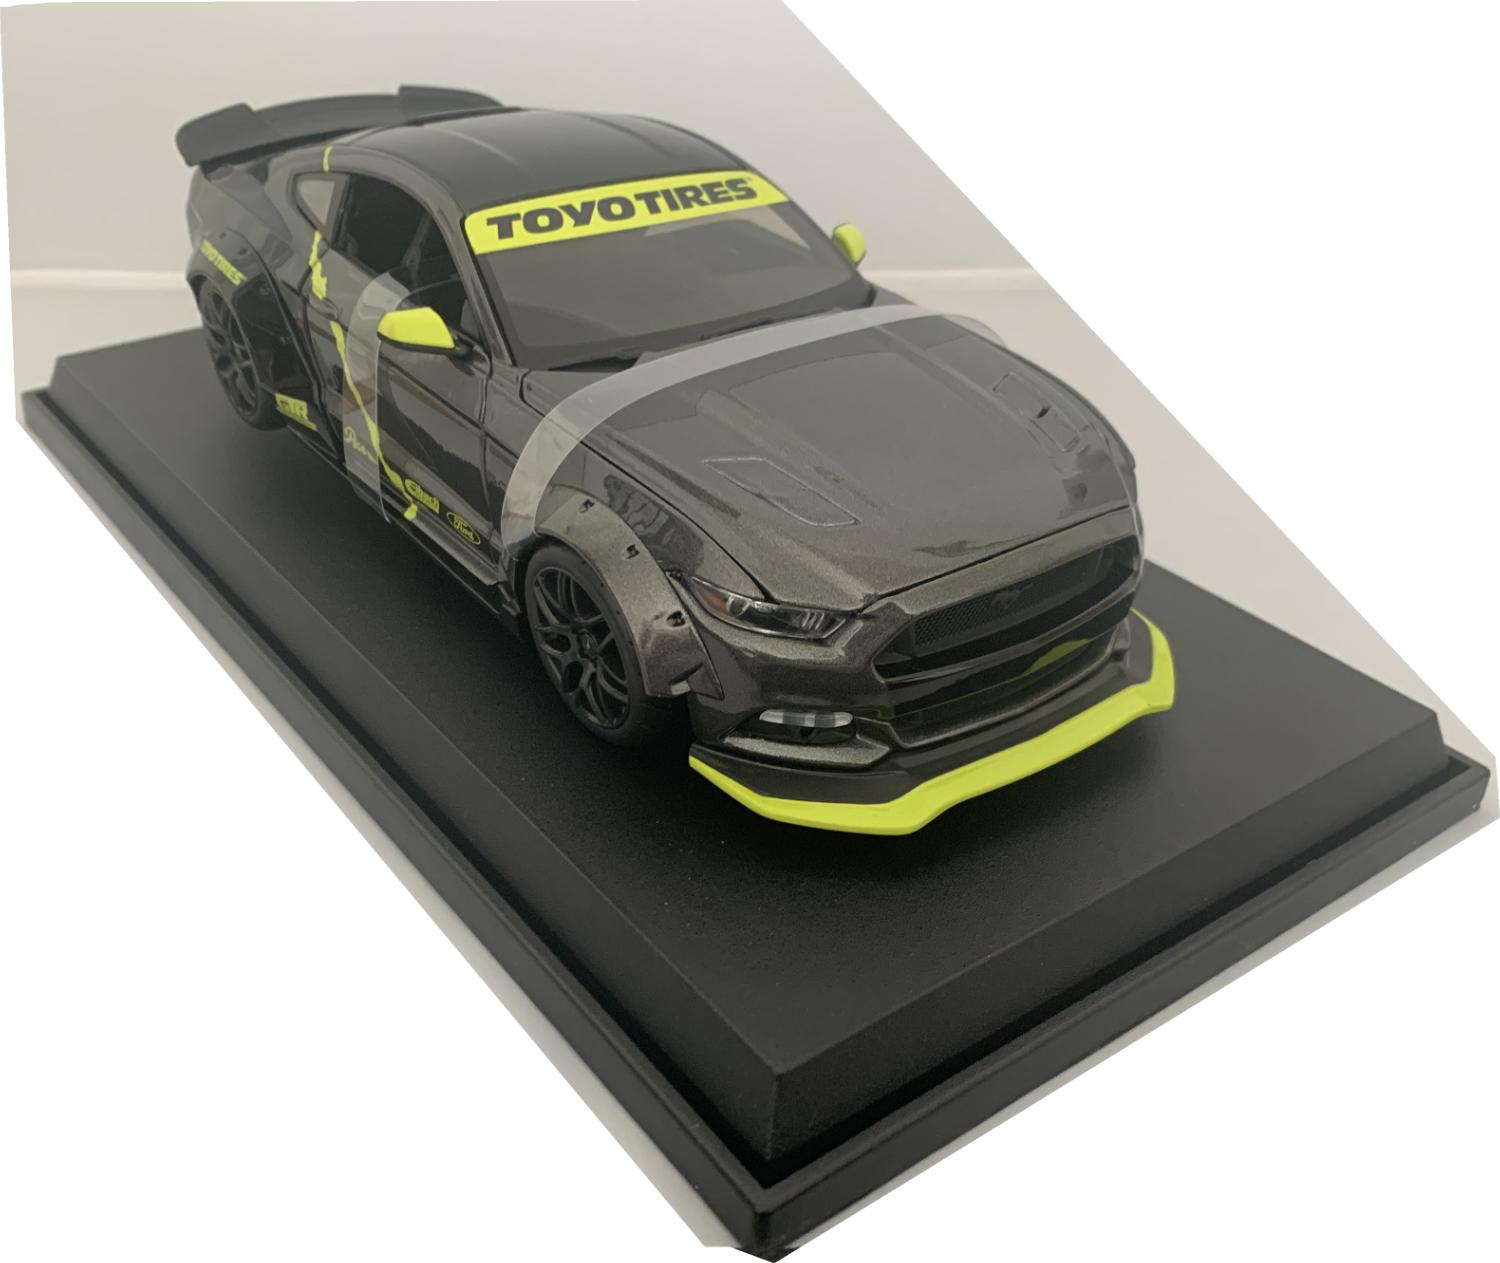 Ford Mustang 5.0 GT 2015 in dark grey / yellow 1:18 scale diecast model from Maisto Design, modern muscle cars